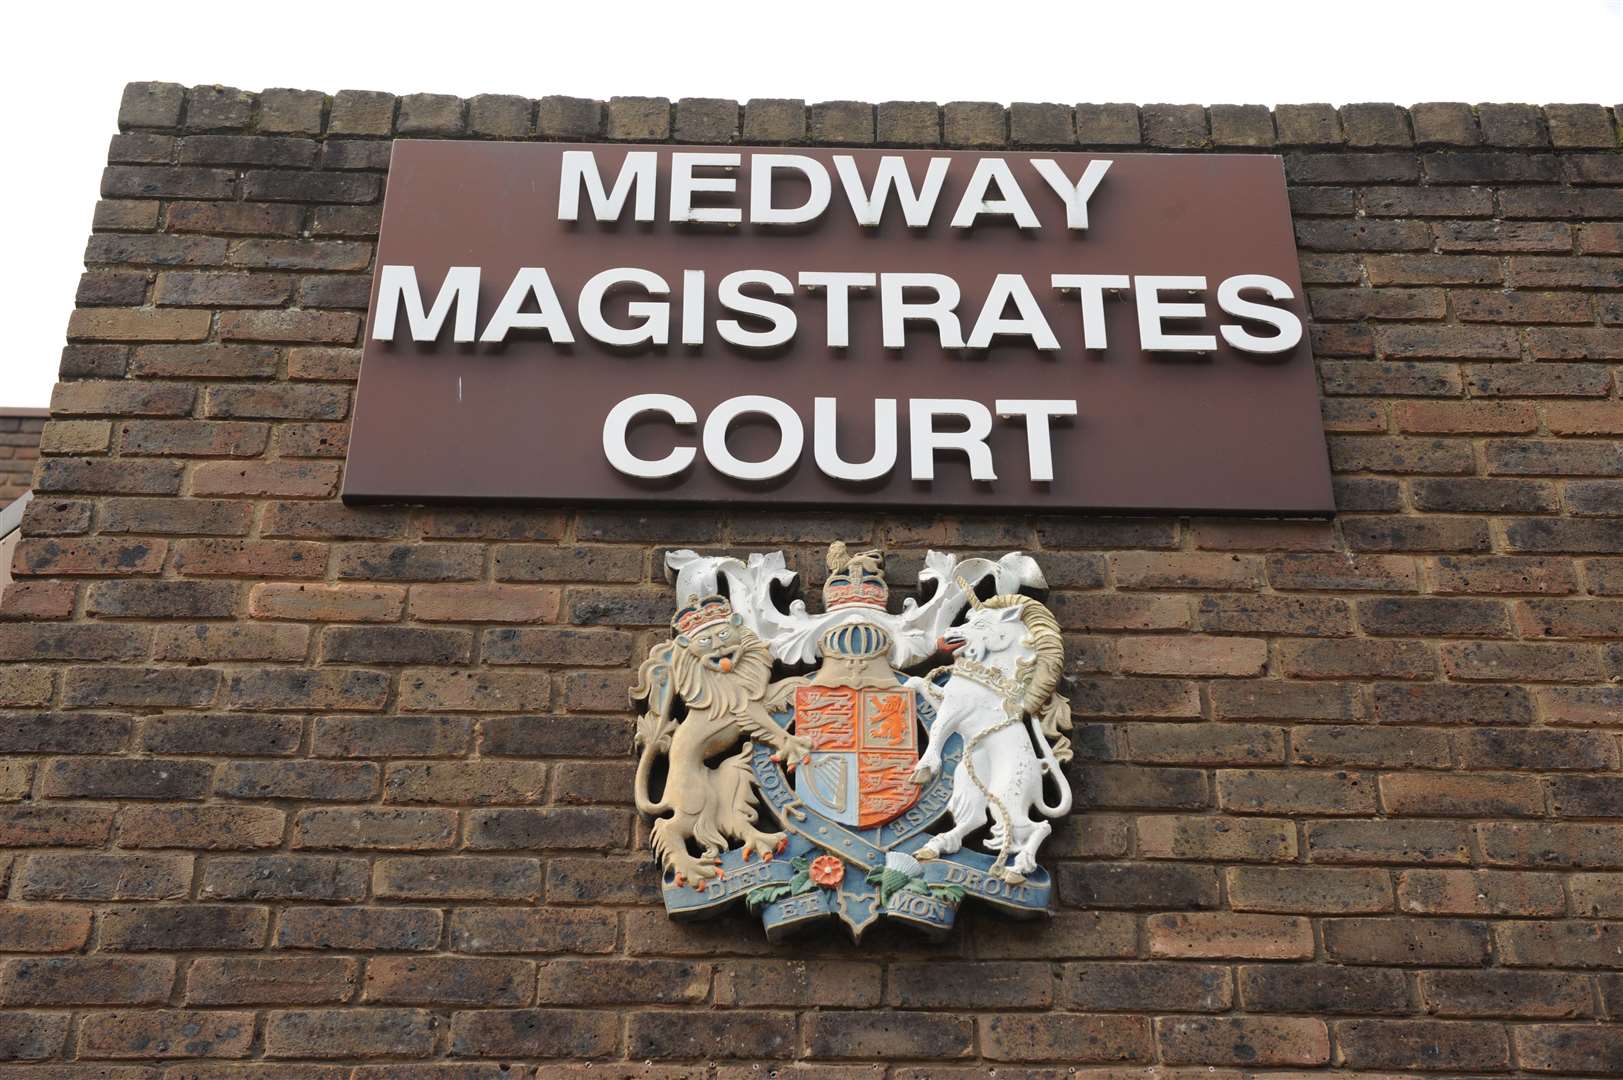 Towner appeared at Medway Magistrates' Court